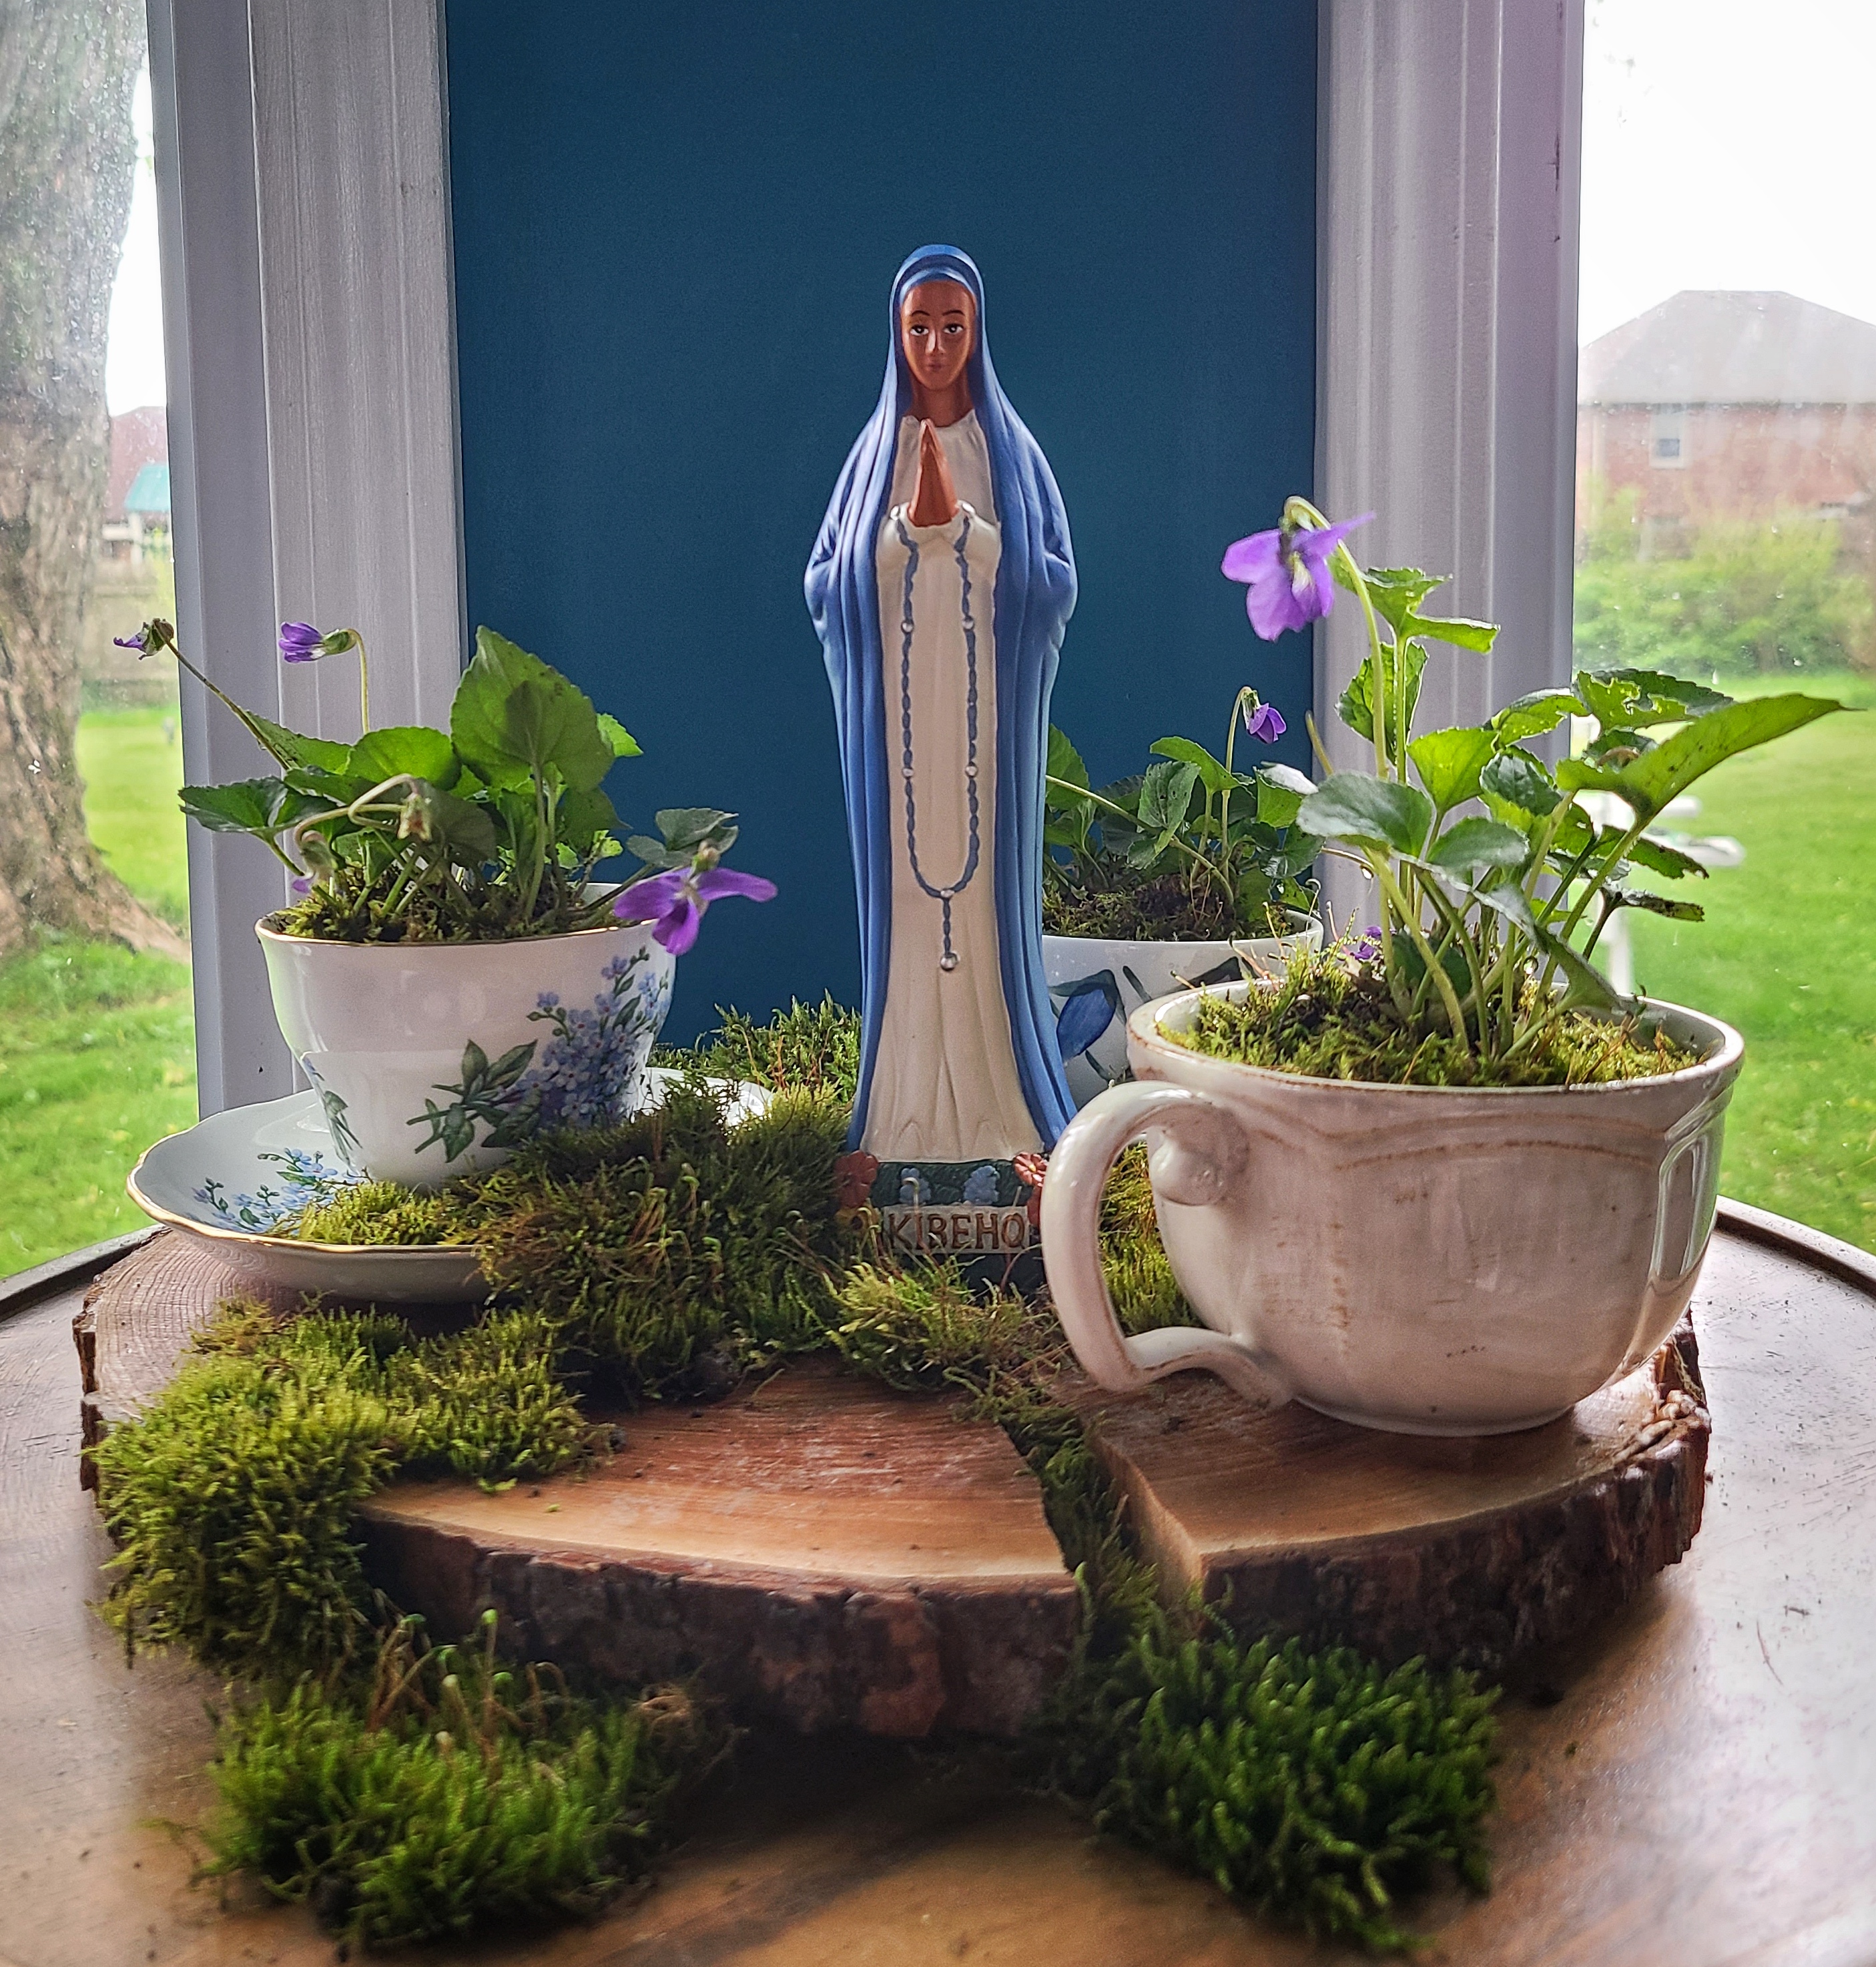 Our Lady of Kibeho teacup garden with wild violets